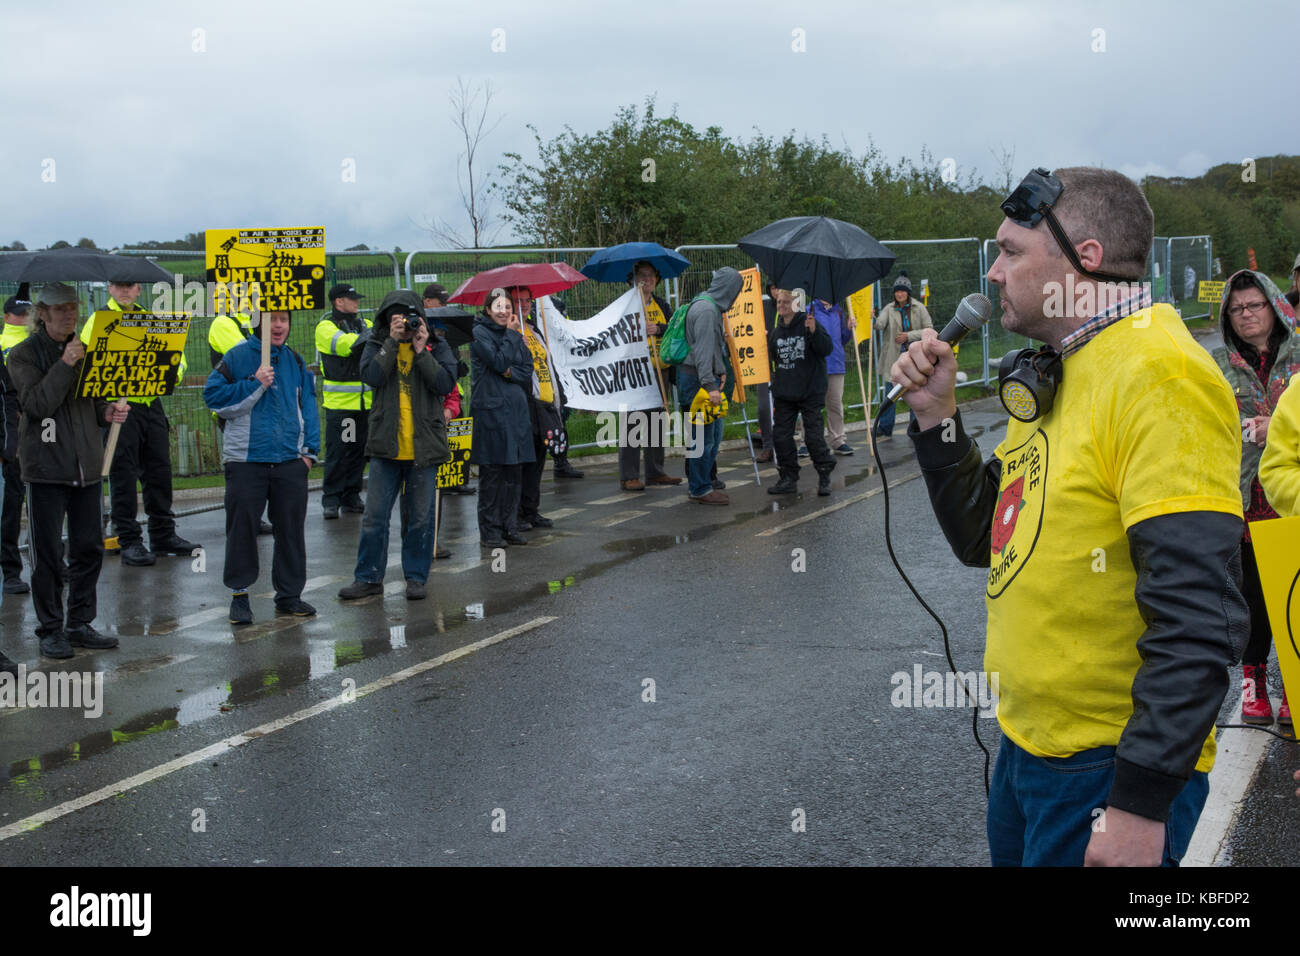 Anti-Fracking Protest, Little Plumpton, Nr Blackpool, Lancashire, UK. 29th September 2017. Protest against fracking at the Preston New Road site operated by Cuadrilla. Alongside locals were campaigners from Manchester, trade unionists, Northern Ireland and by a group of Quakers. Pictured local busnessman Brian Morrison, who earlier led a 28 car slow procession past the site with horns honking. He had previously been threatened with arrest for honking his horn. Credit: Steve Bell/Alamy Live News. Stock Photo